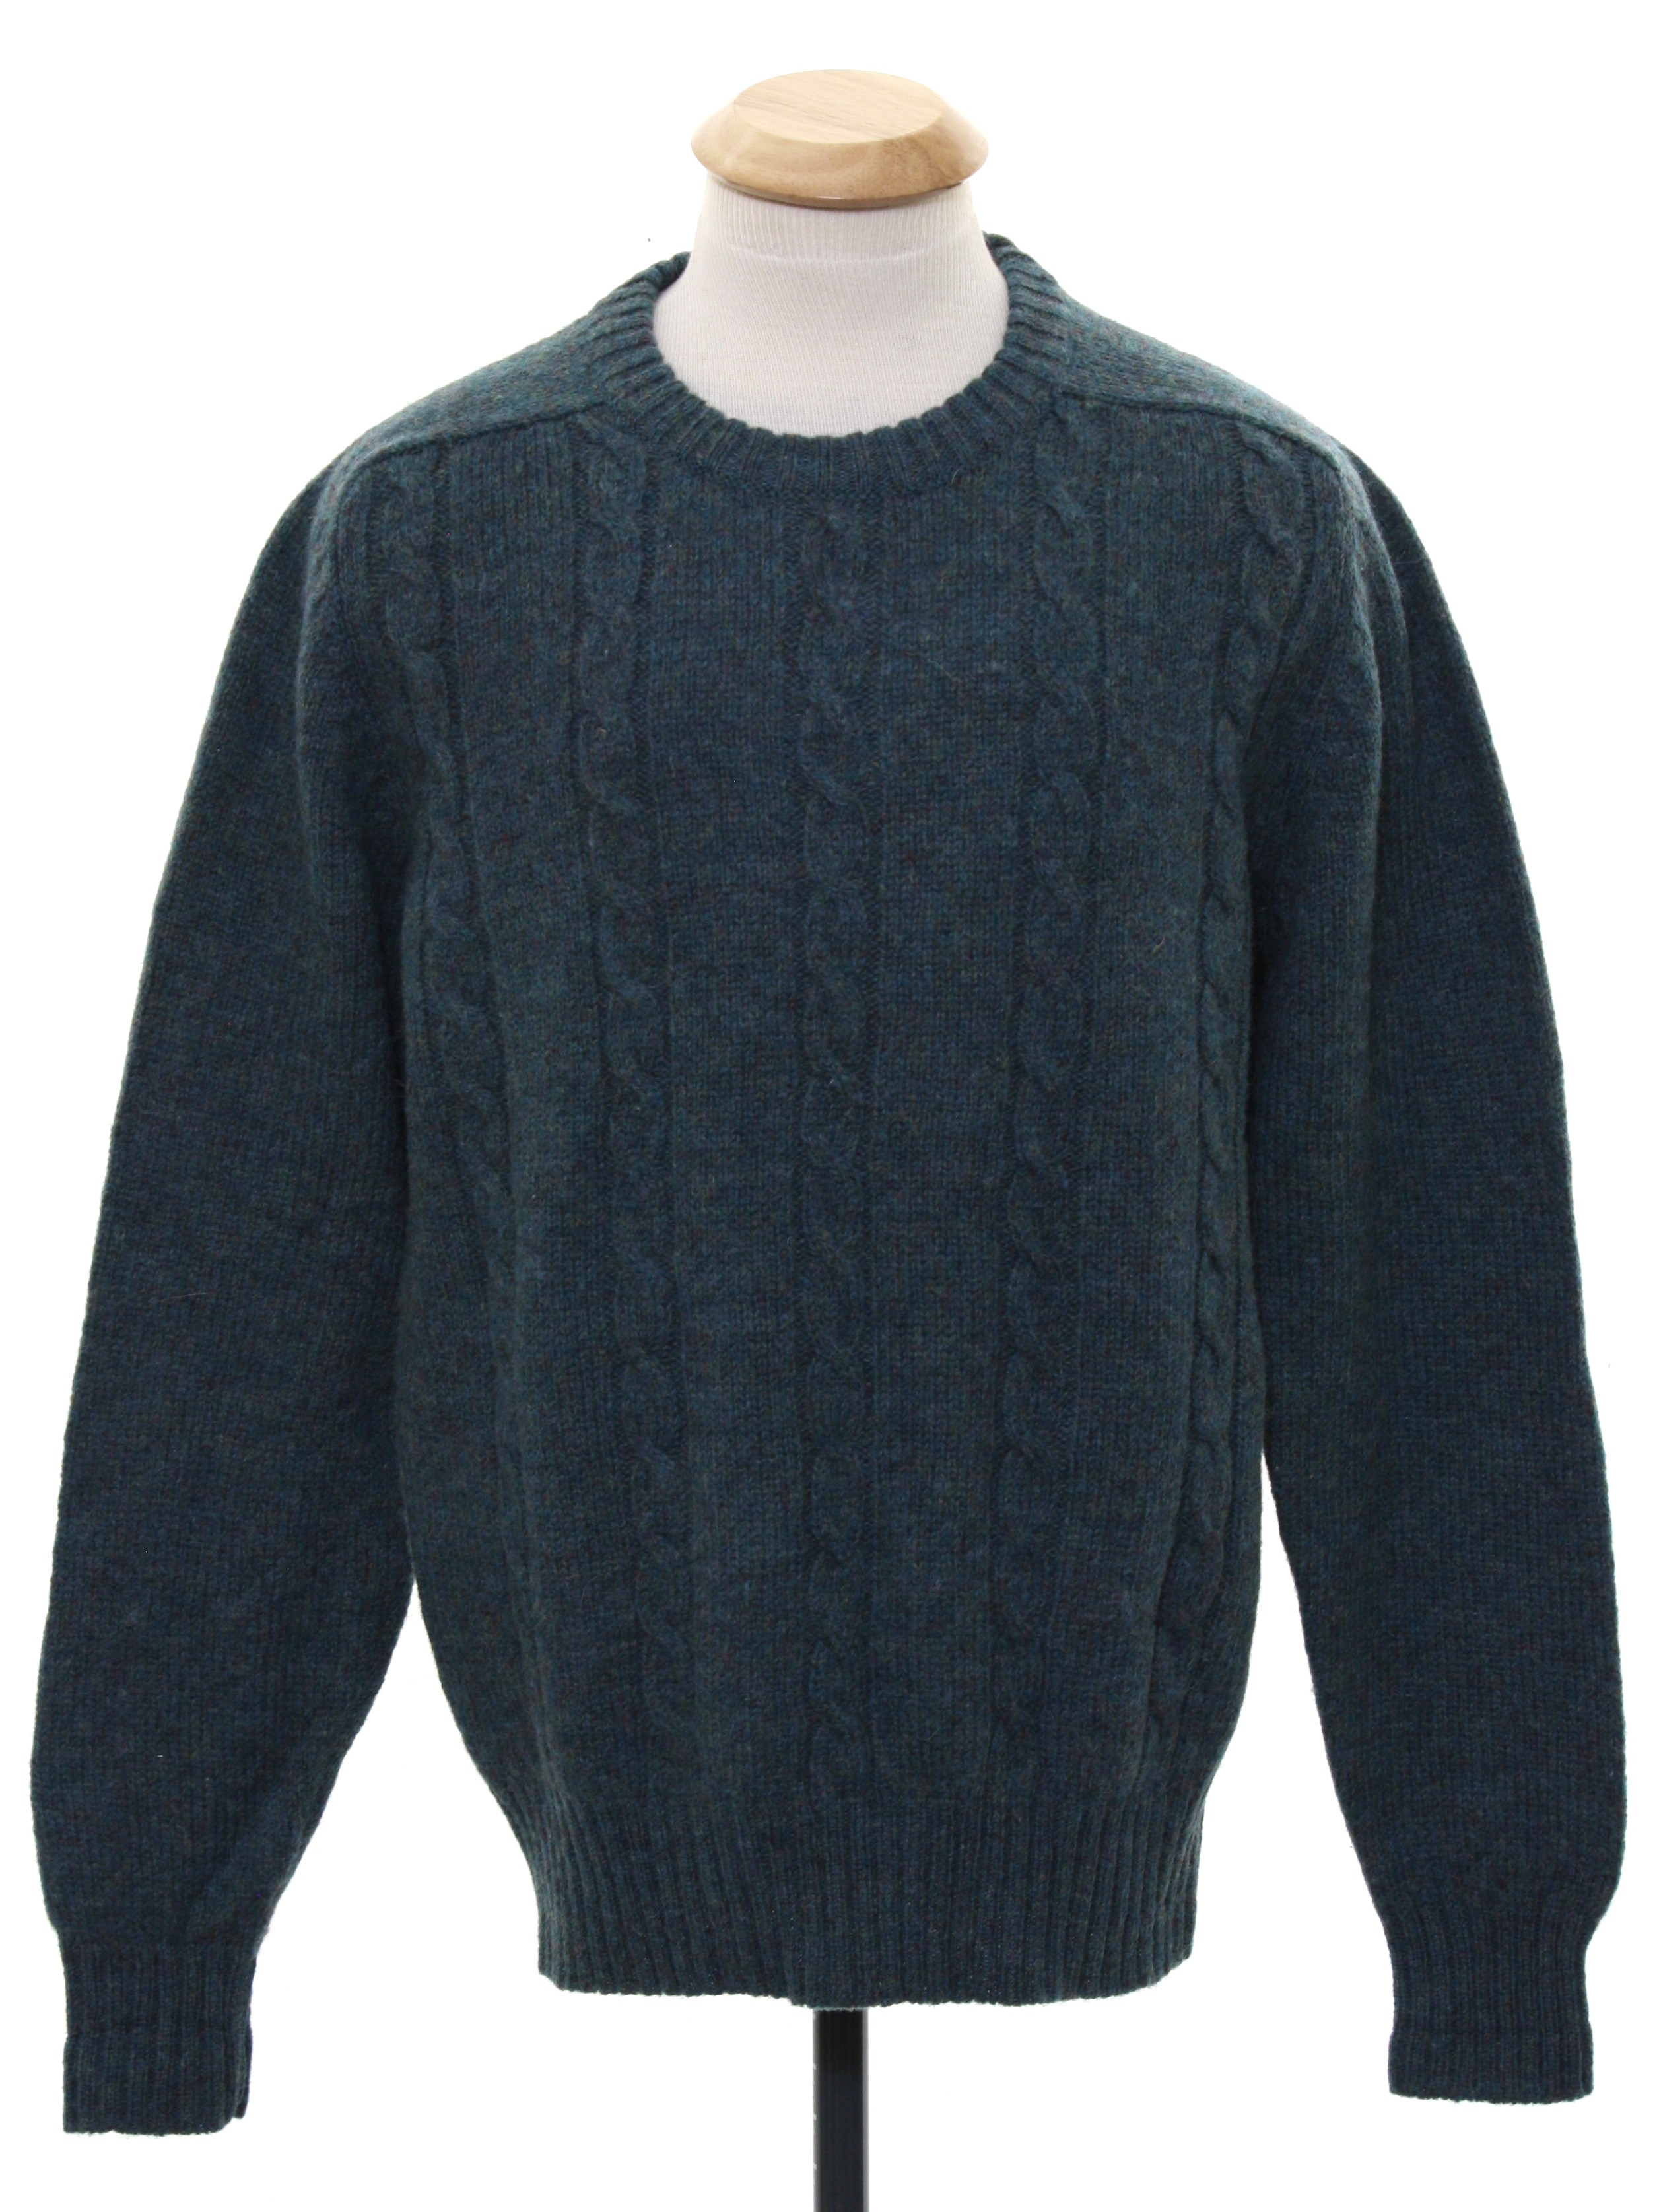 Retro 70s Sweater (Finalist) : Late 70s or Early 80s -Finalist- Mens ...